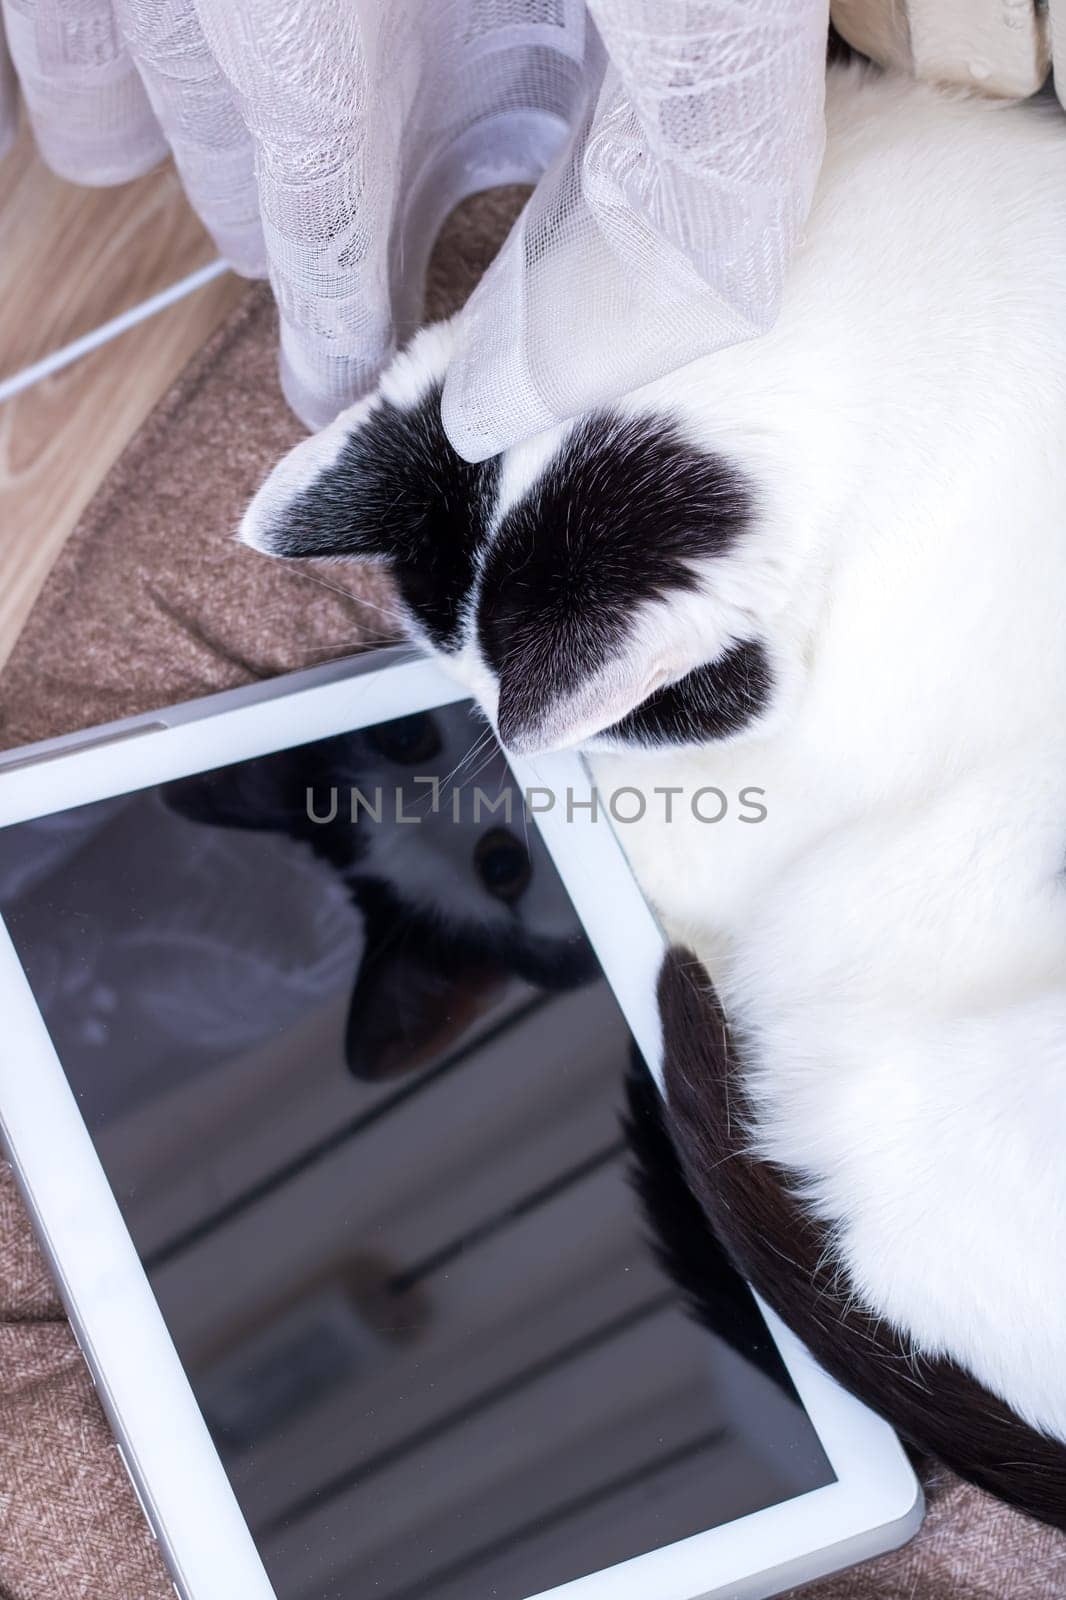 A white cat looking at a tablet screen close up